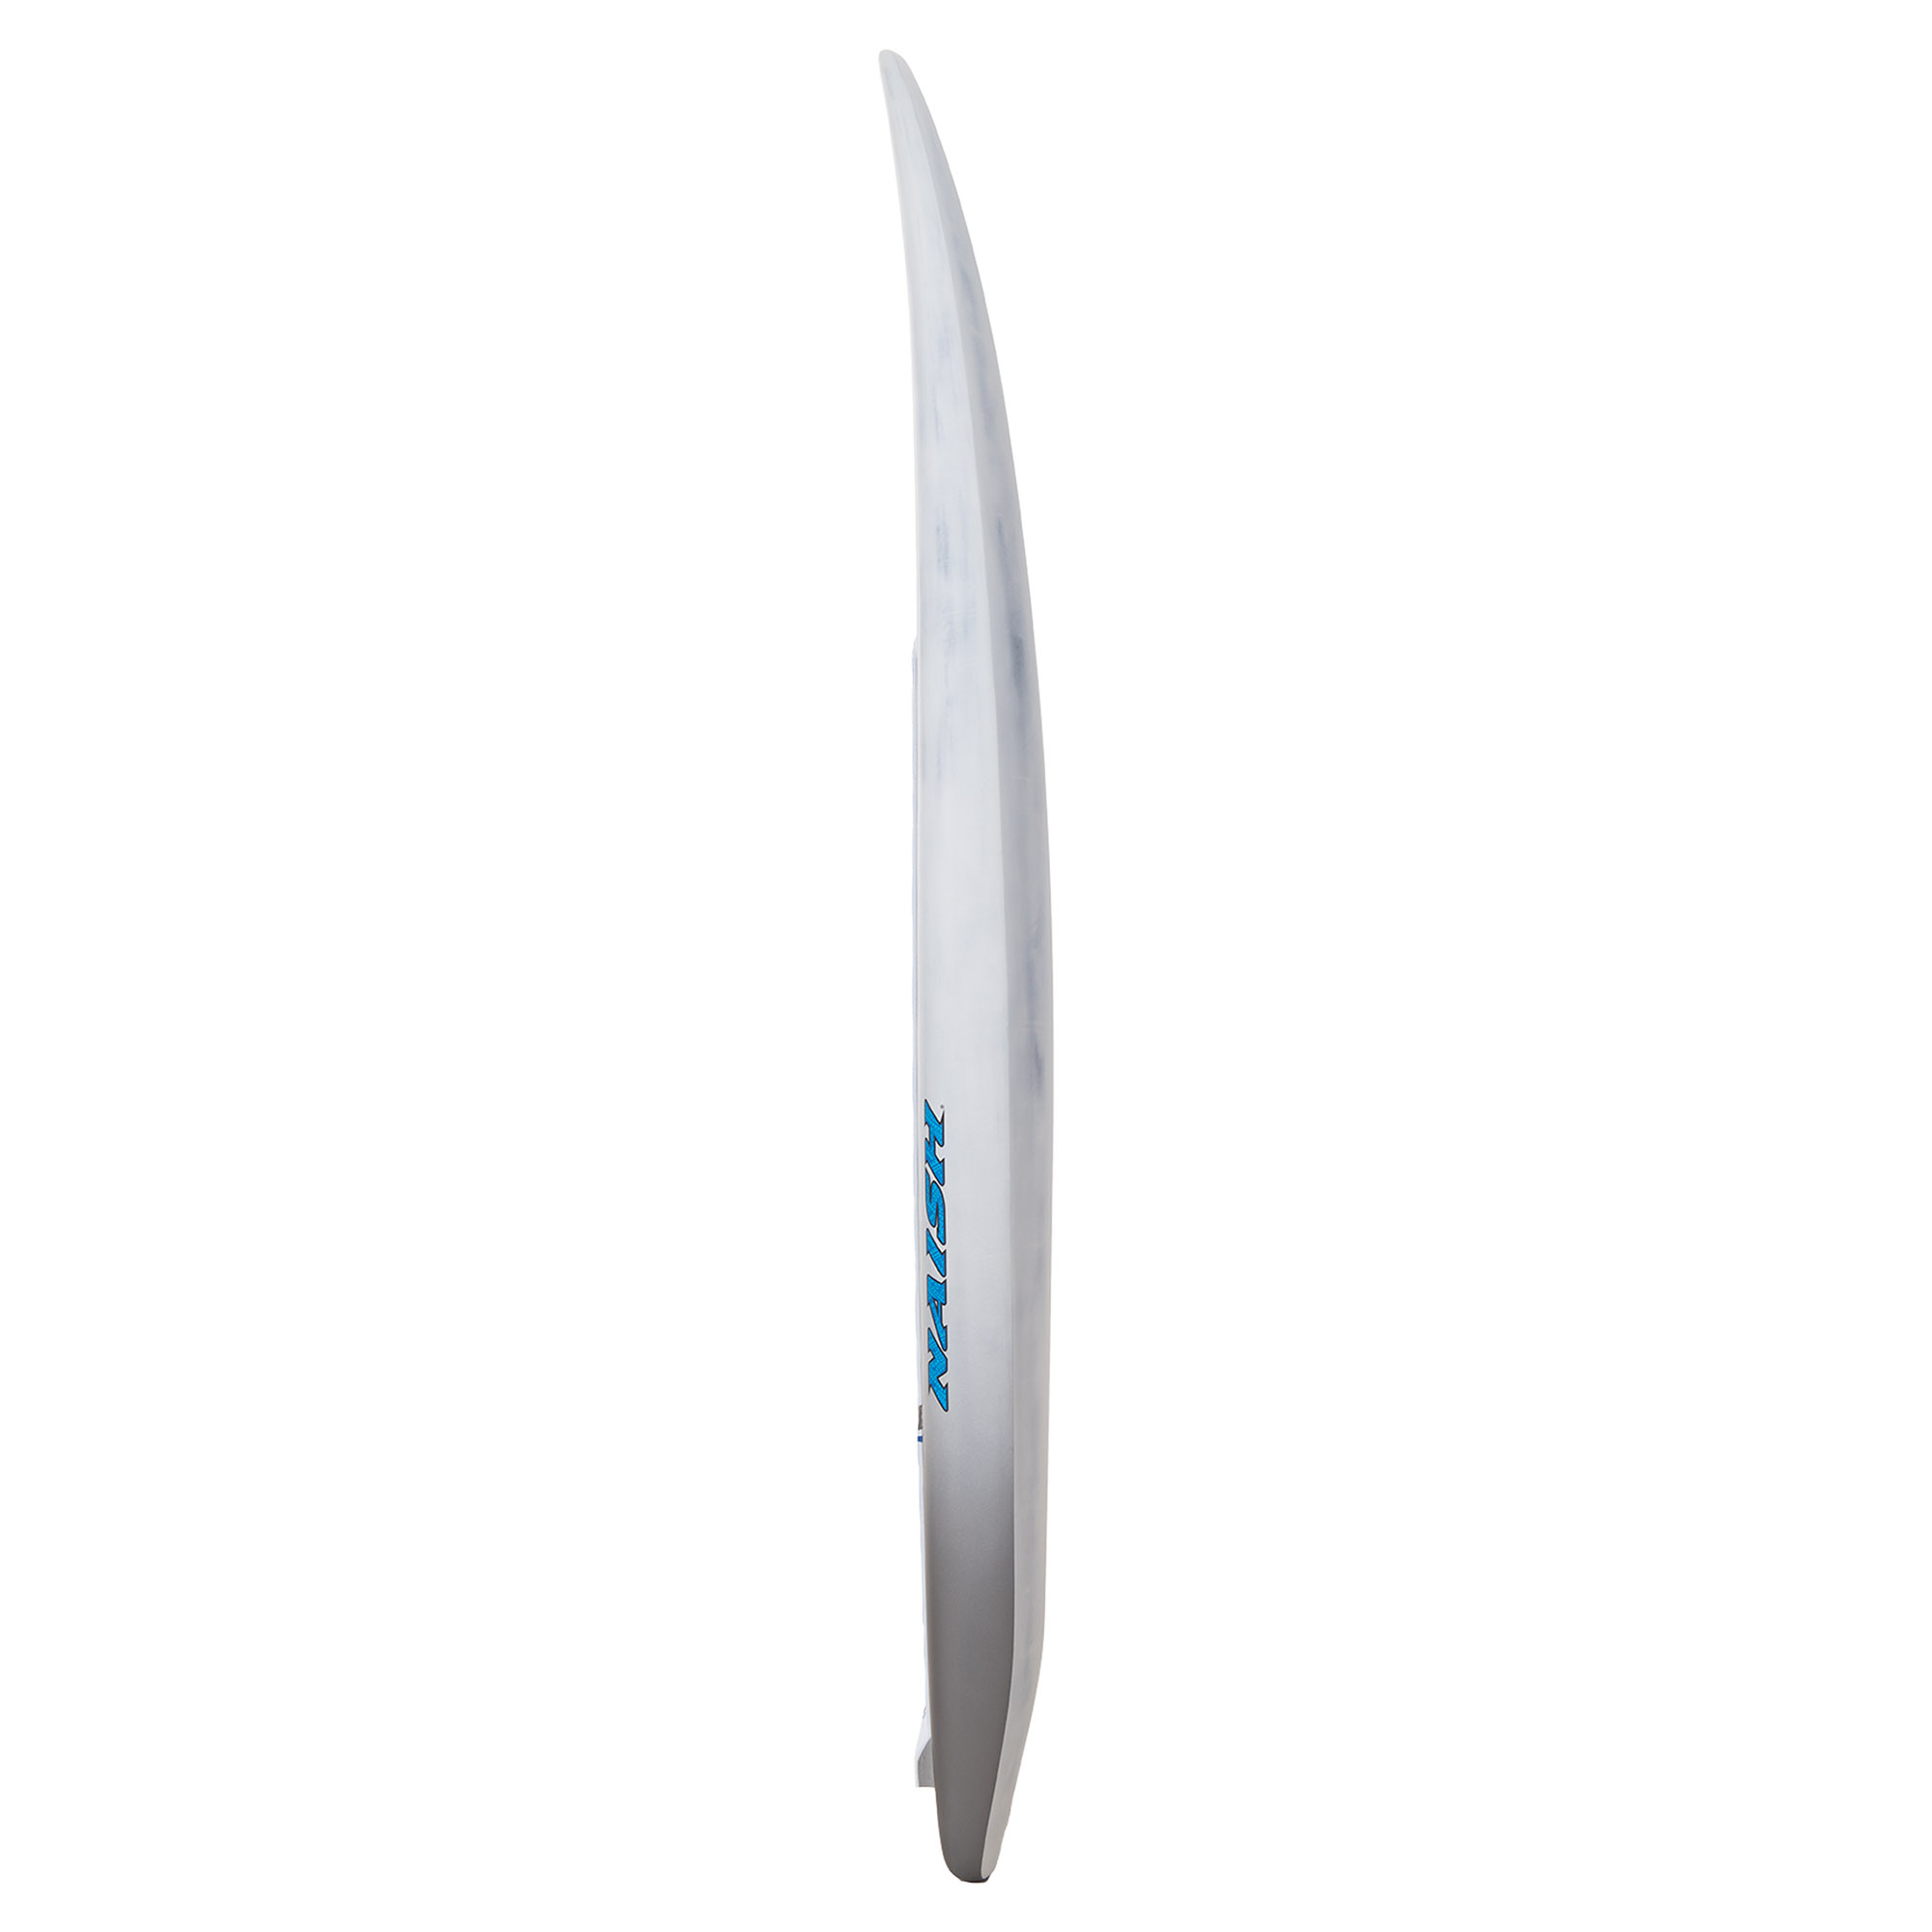 0690244_naish-s26-hover-wing-foil-carbon-ultra-75-bb-75